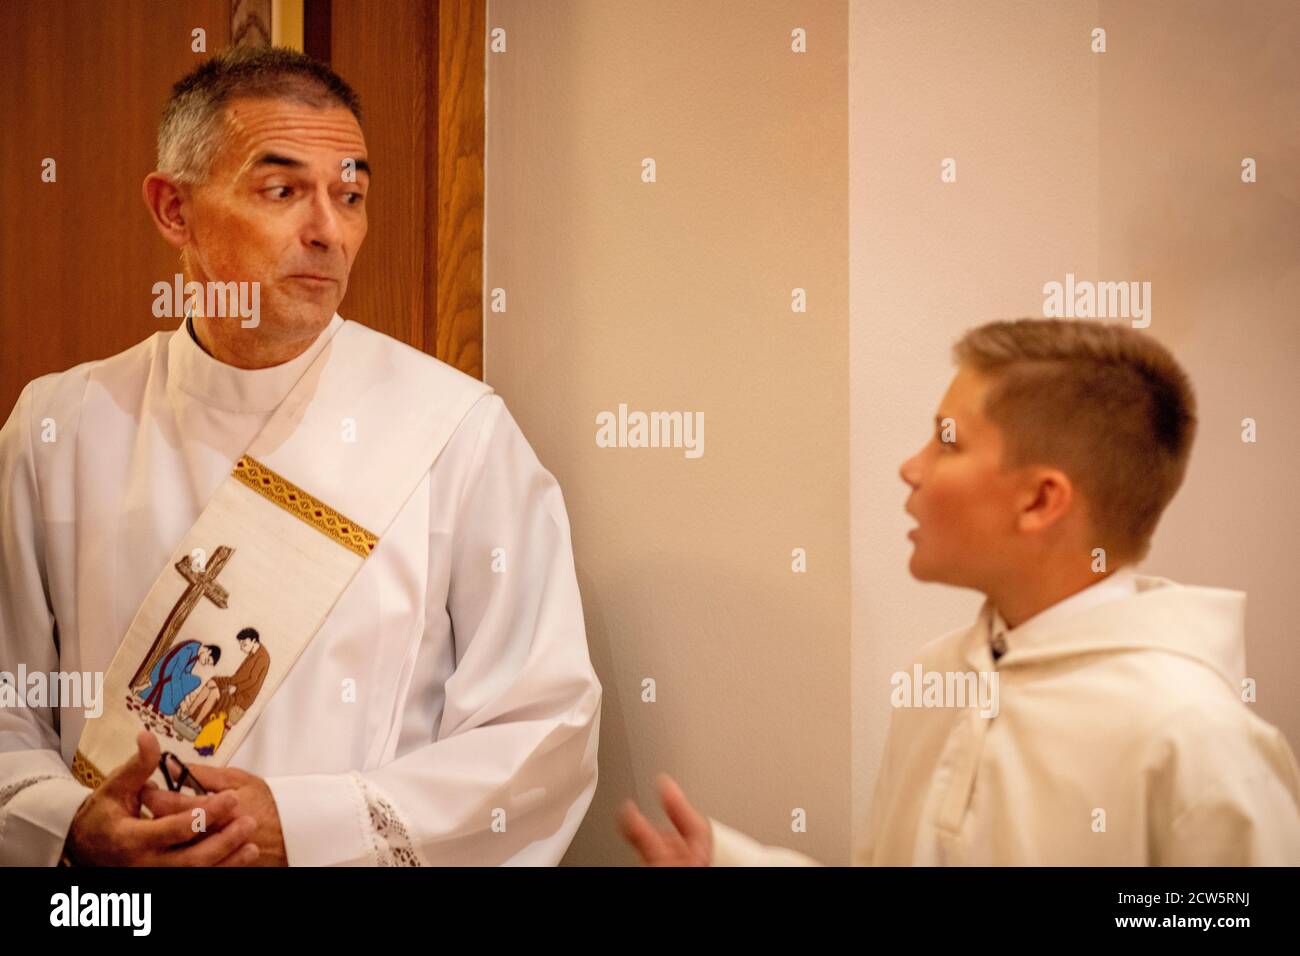 At a Southern California Catholic church, a robed deacon with a picture sash converses with a young boy altar assistant before mass. Stock Photo